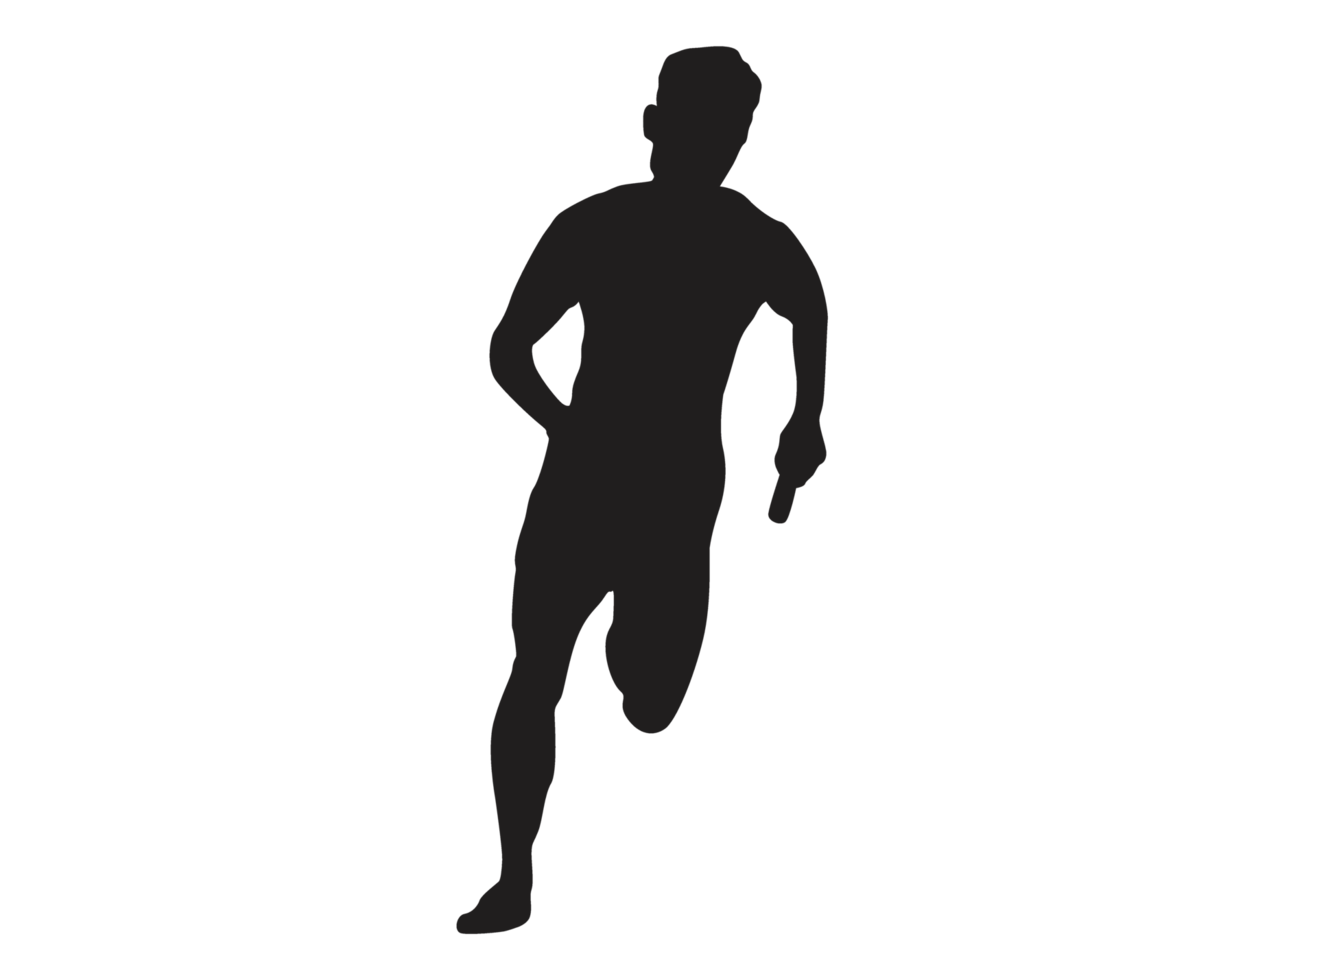 Silhouette of a Runner png